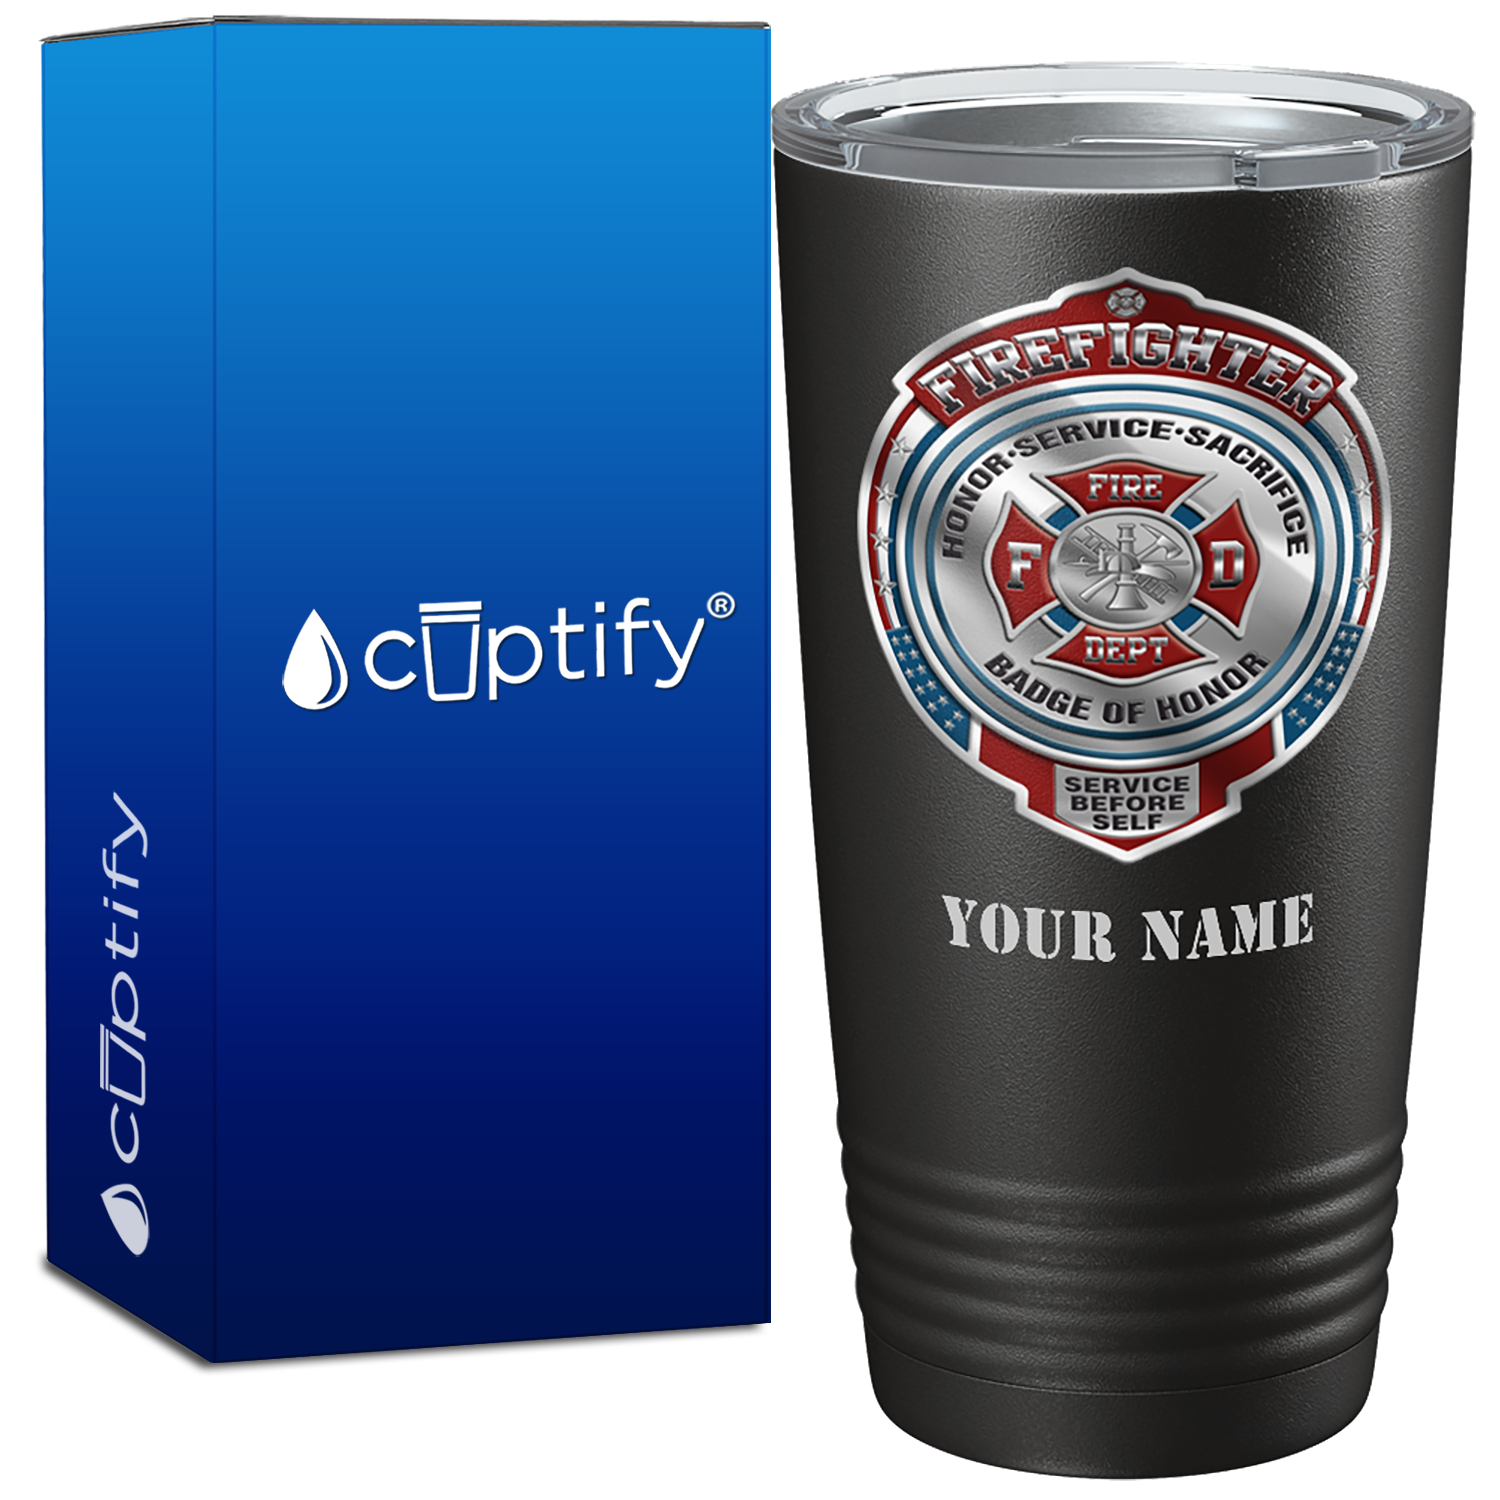 Personalized Firefighter Badge of Honor on Black Tumbler